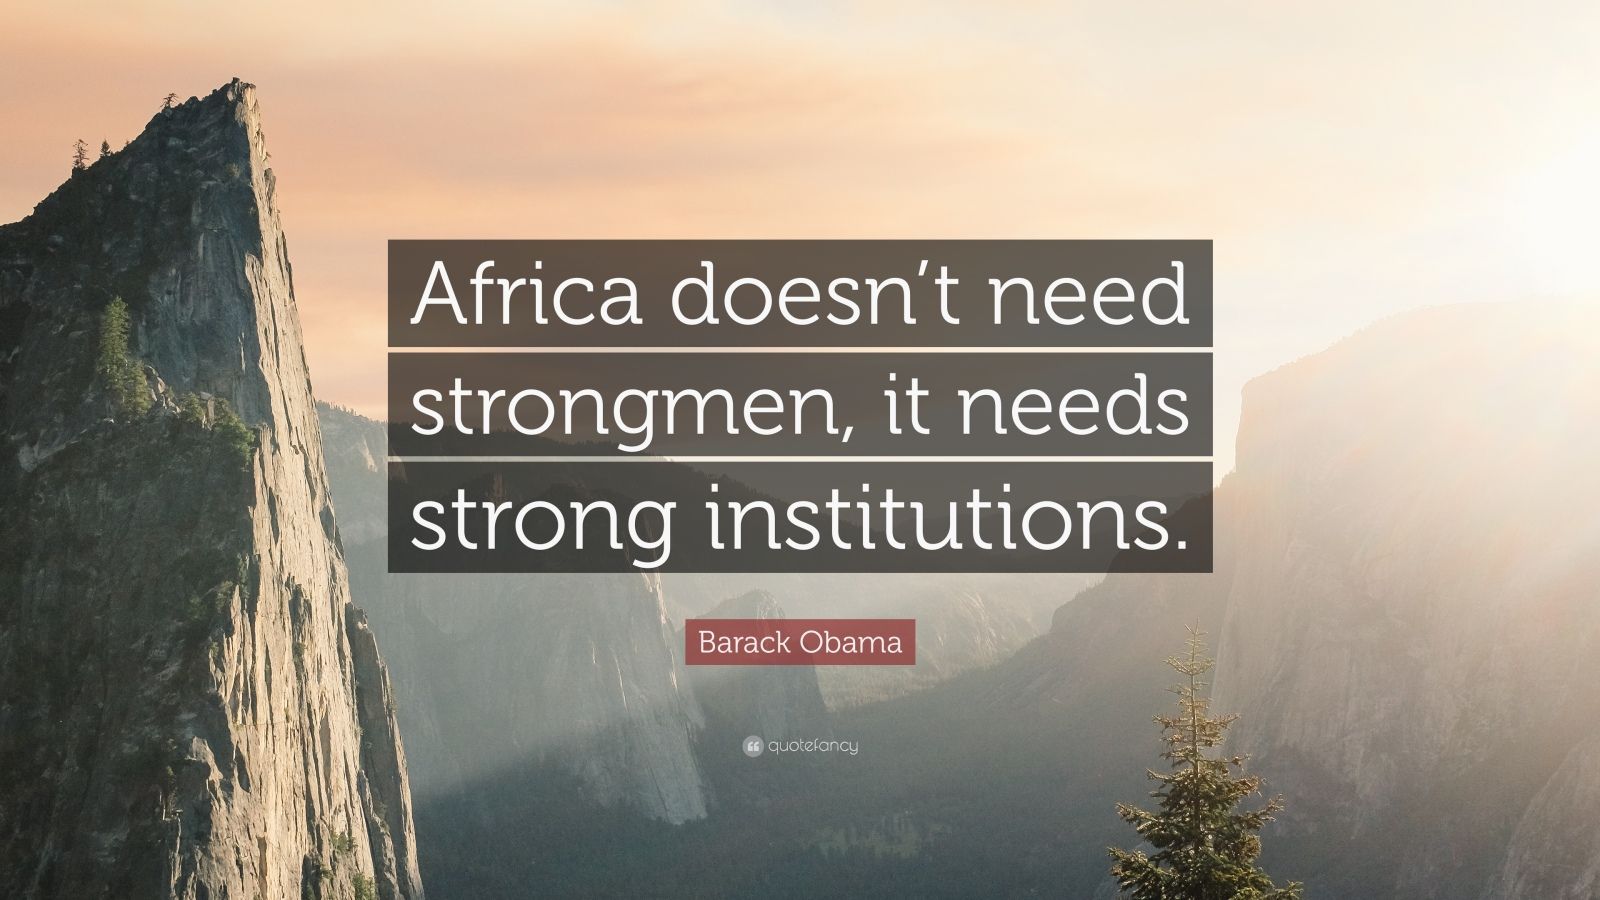 138464 Barack Obama Quote Africa doesn t need strongmen it needs strong